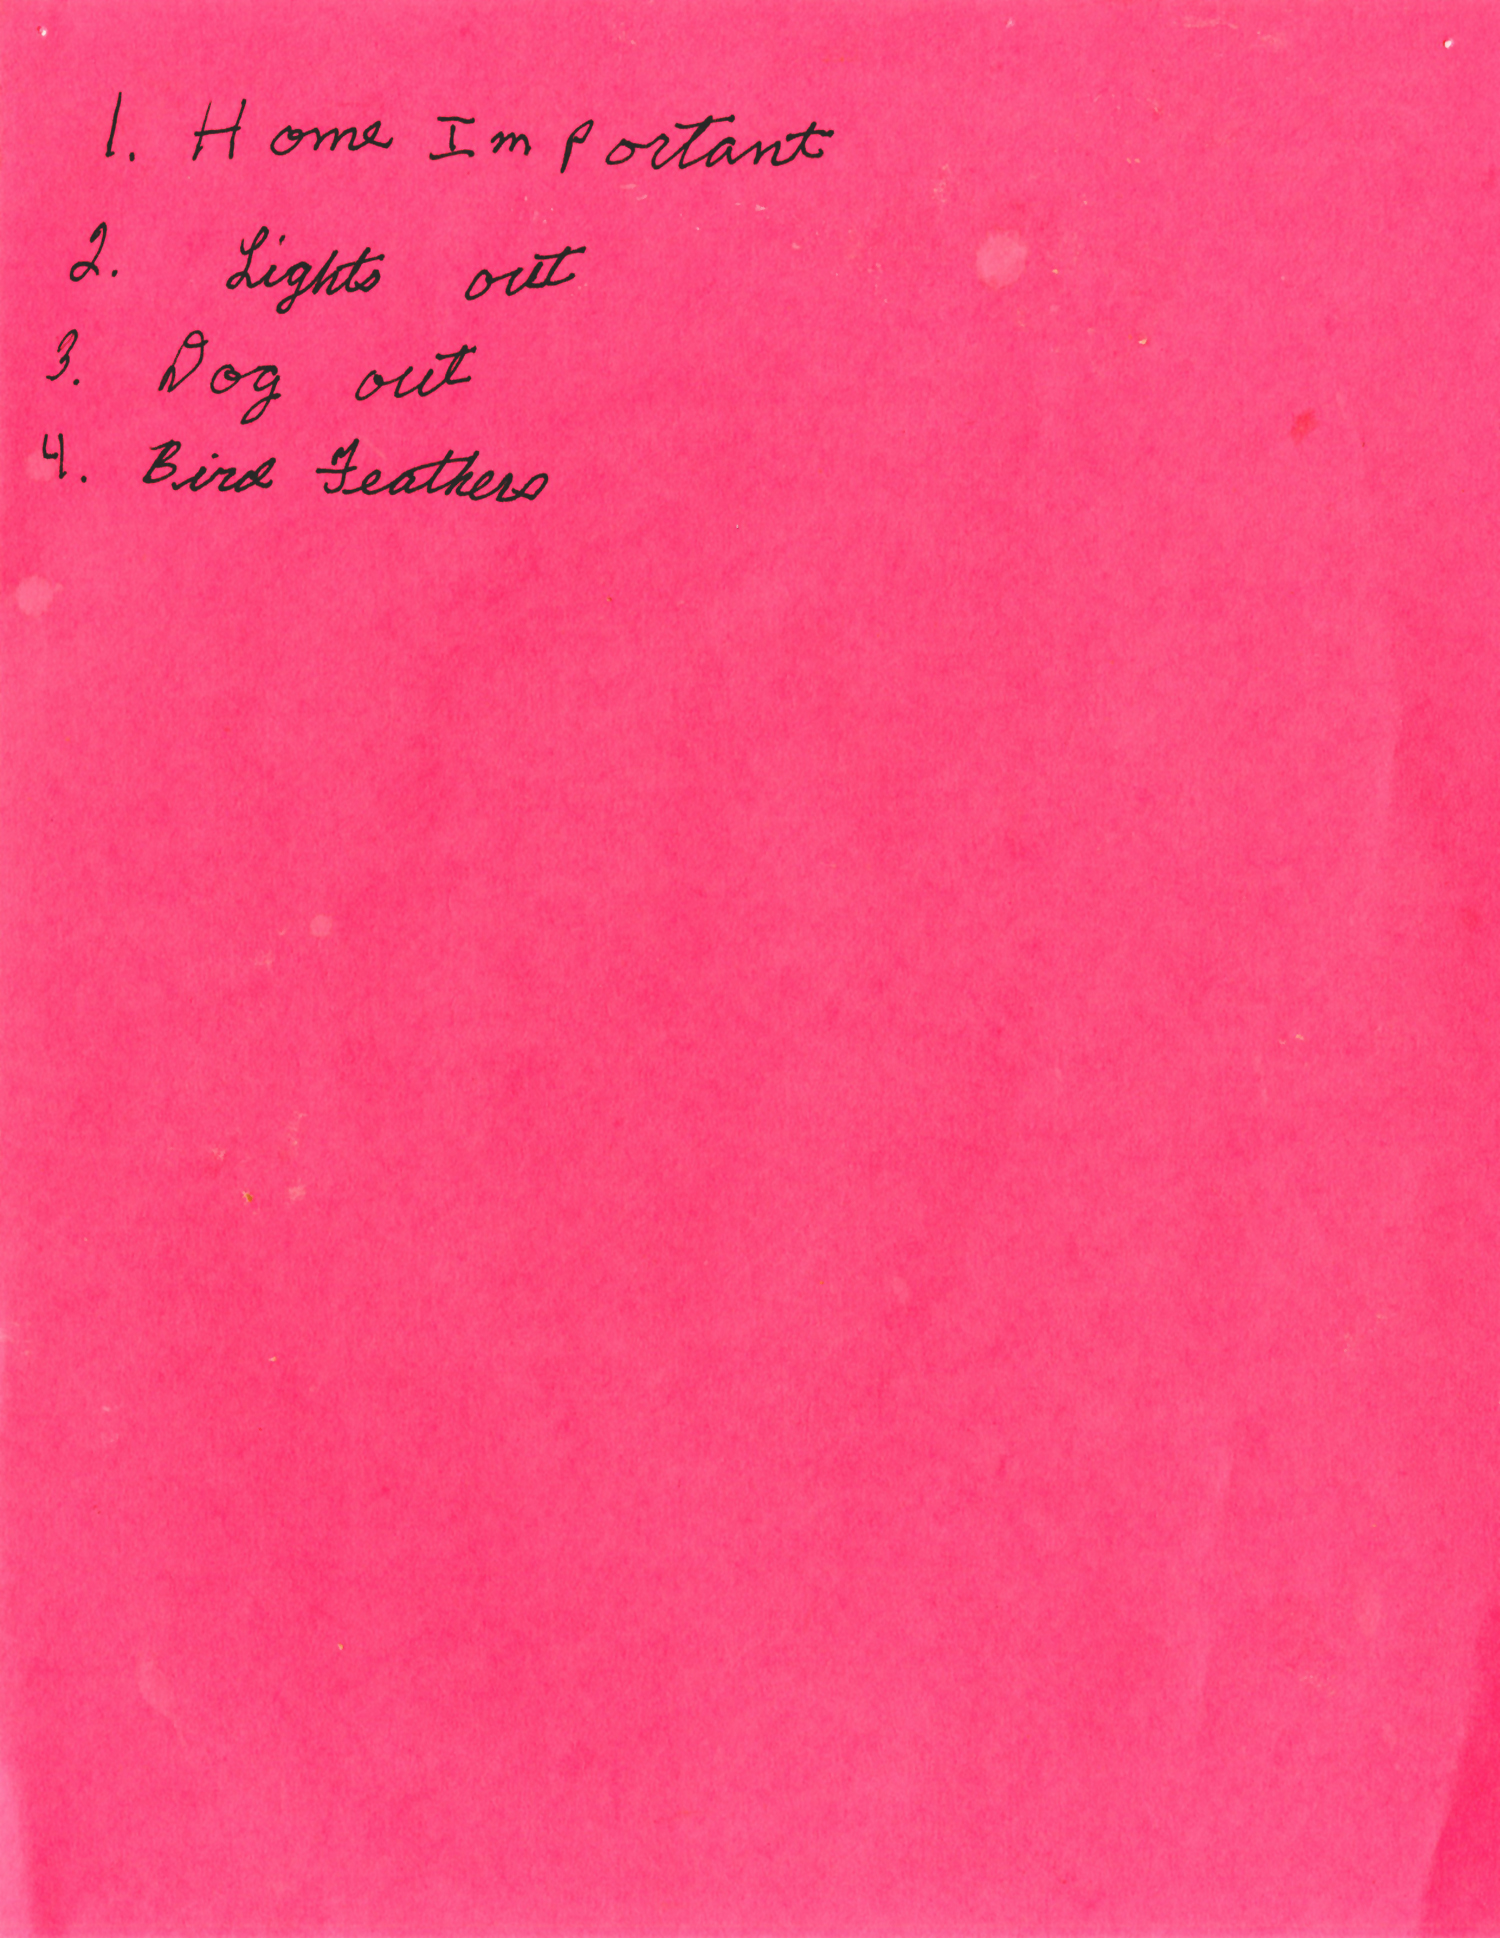 pink paper with four lines of text in a list that says 1. home important 2. lights out 3. dog out 4. bird feathers